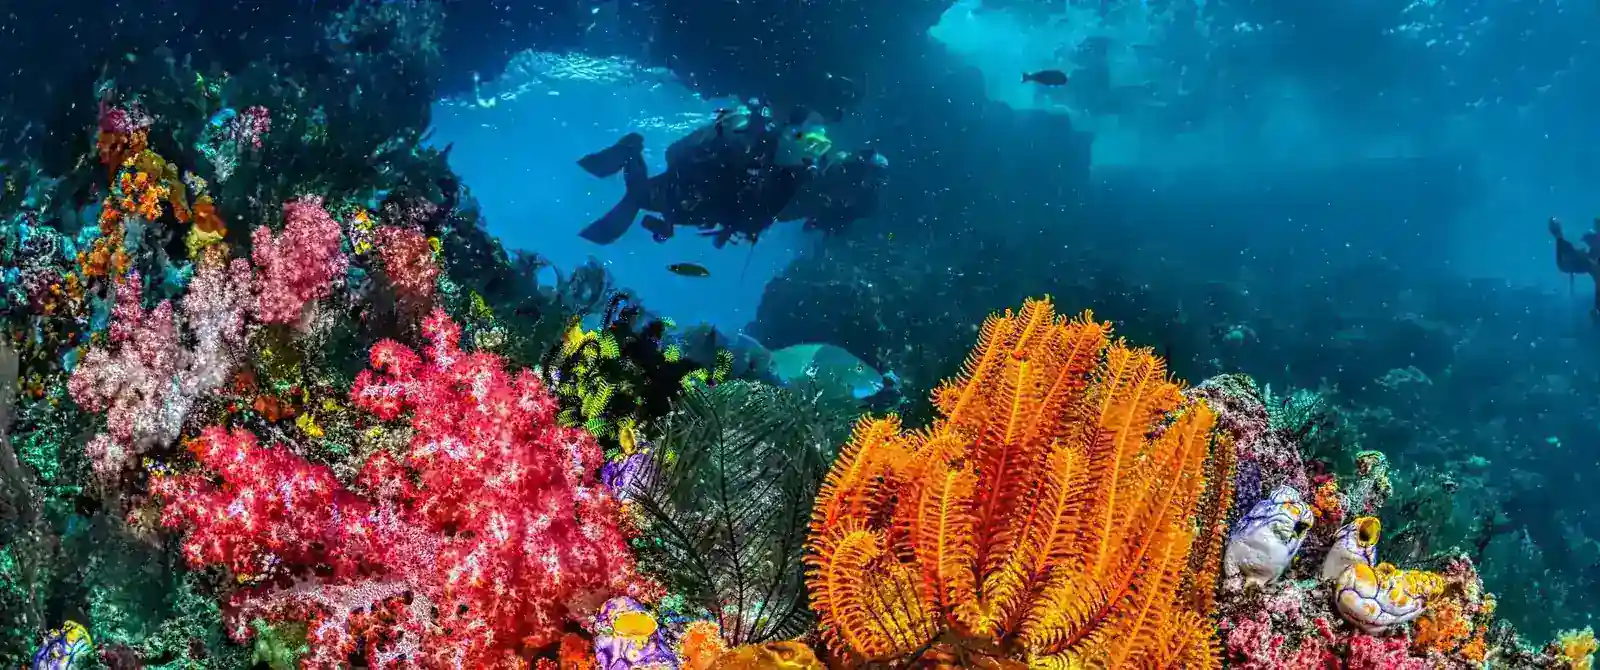 a pair of divers over a colourful reef of soft corals